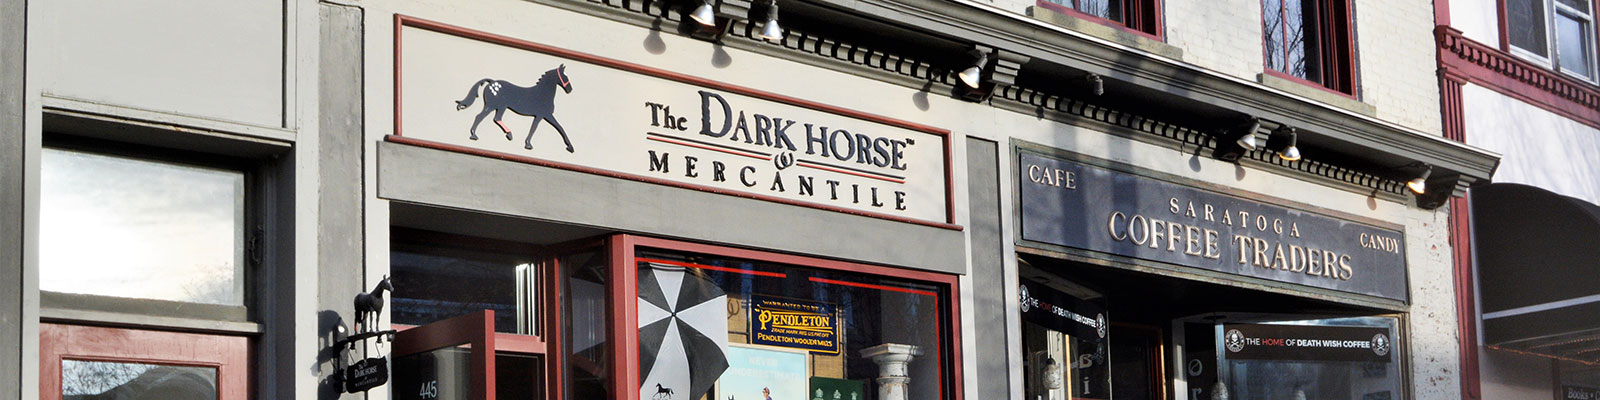 The Dark Horse Mercantile storefront sign